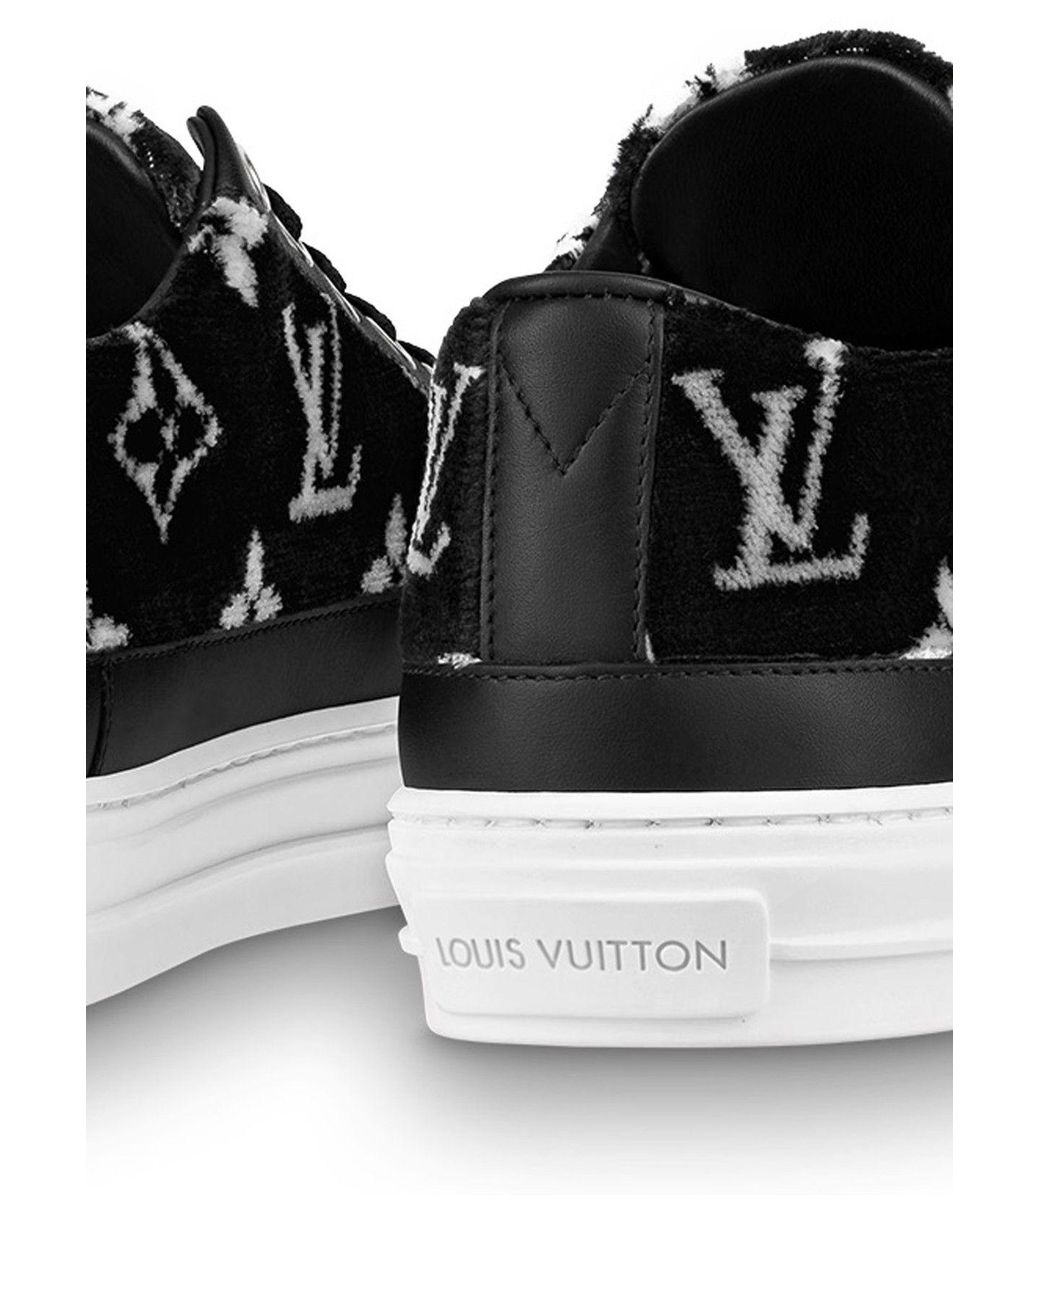 Louis Vuitton Time Out High-top Sneakers in Monogram Embroidered